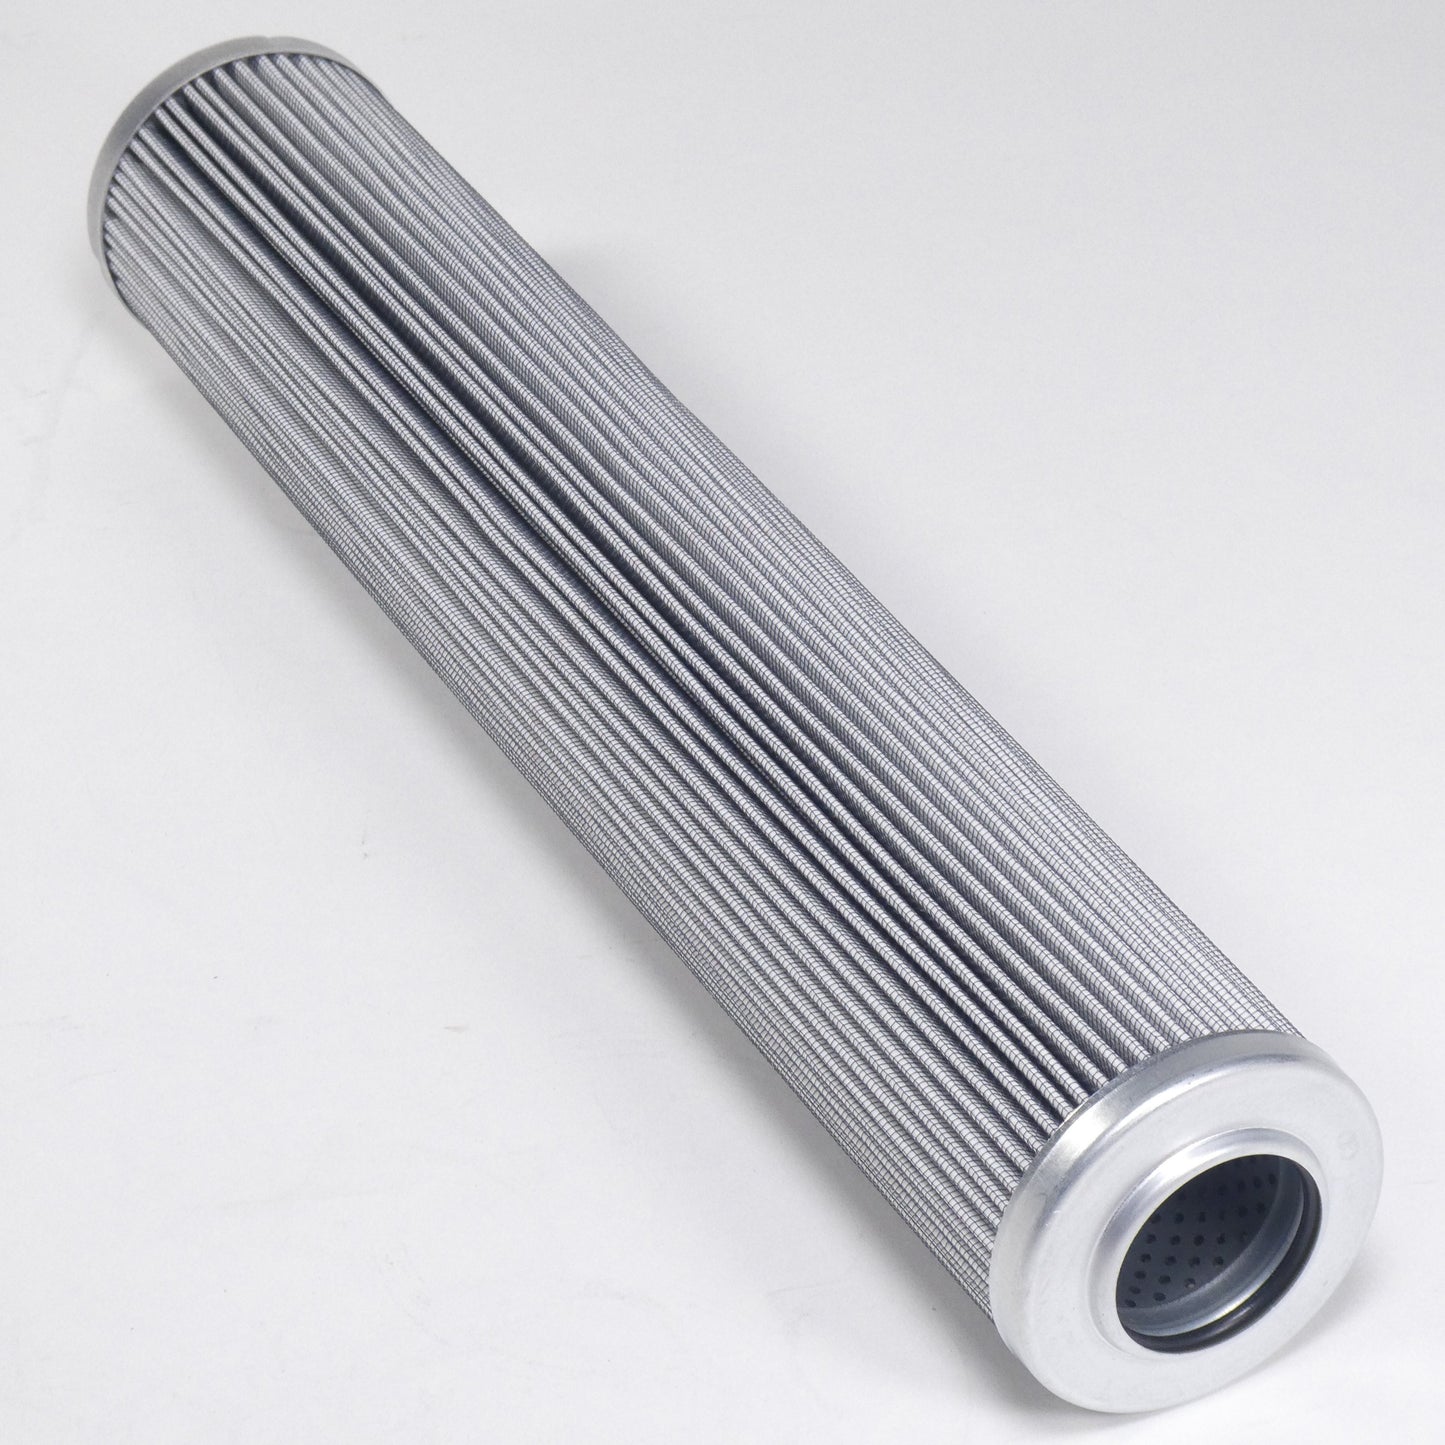 Hydrafil Replacement Filter Element for Mahle 76372122